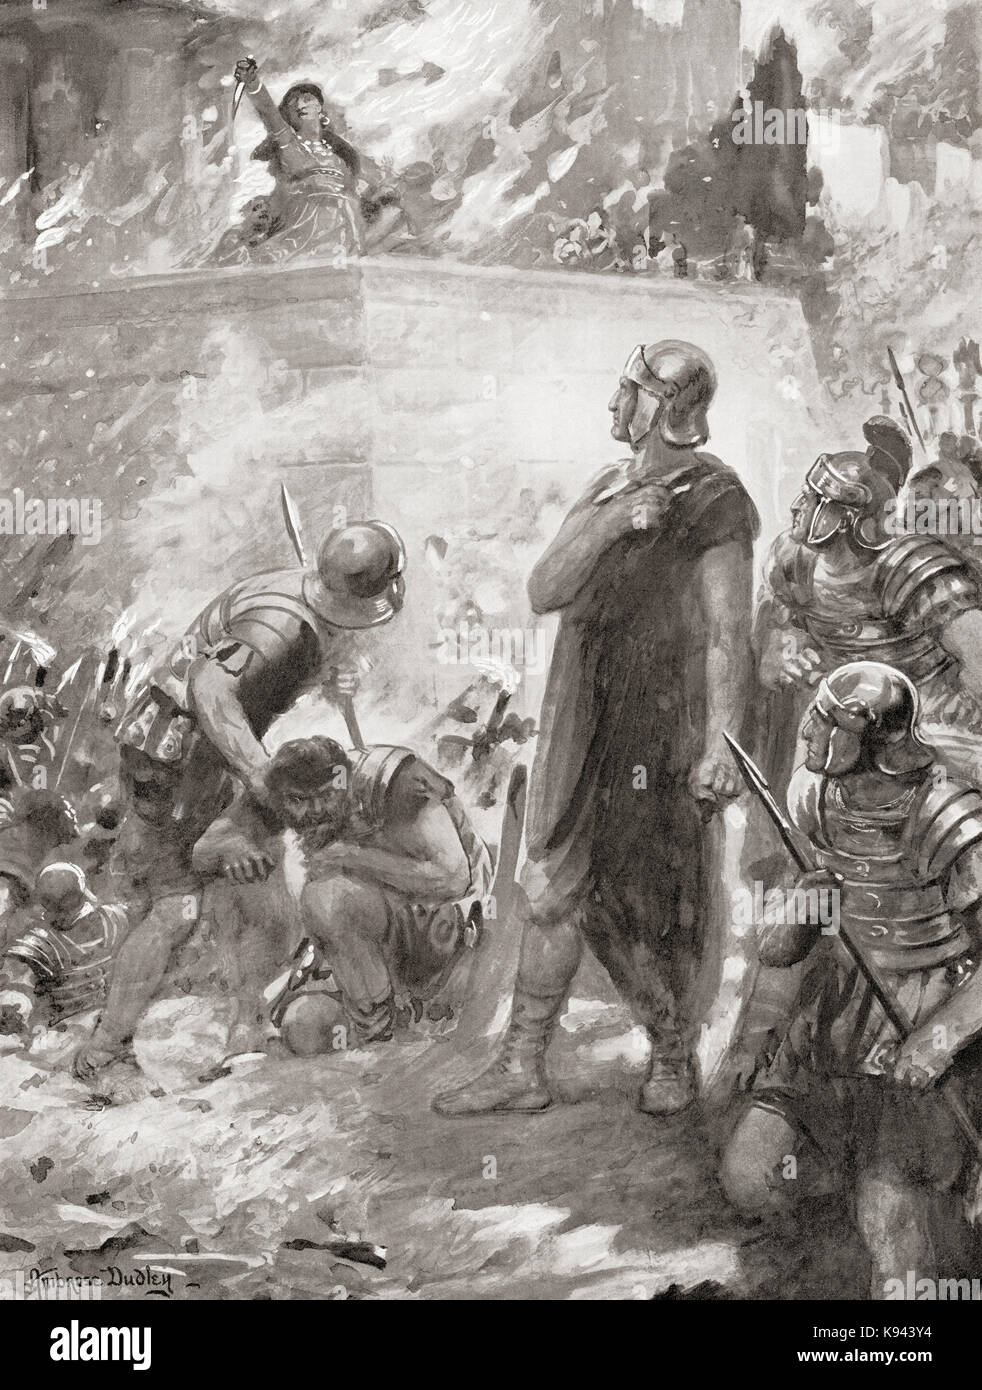 The final destruction of Carthage by the Romans, 146BC.  Hasdrubal, who had escaped from the city, seen here begging for his life at the feet of Scipio who granted him his life but paraded him before the surviving Carthaginians who had taken refuge in the burning temple of Aesculapius.  When his wife witnessed this she threw herself into the flames.  Hasdrubal the Boetharch, Carthaginian general during the Third Punic War.  After the painting by Ambrose Dudley, (1867-1951).  From Hutchinson's History of the Nations, published 1915. Stock Photo